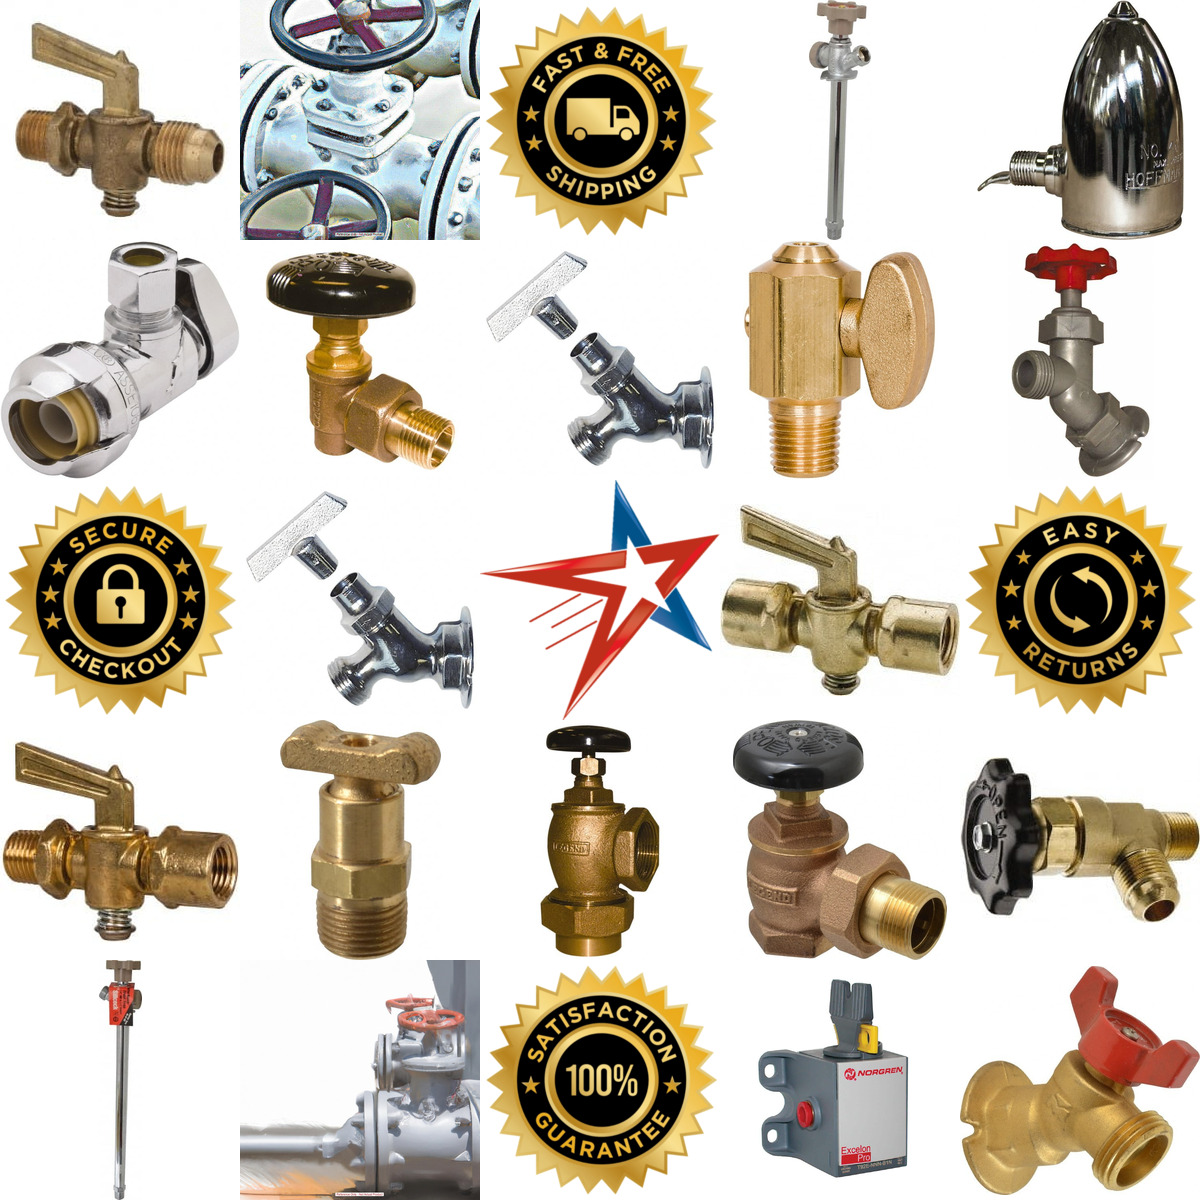 A selection of Drain Stop and Shutoff Valves products on GoVets